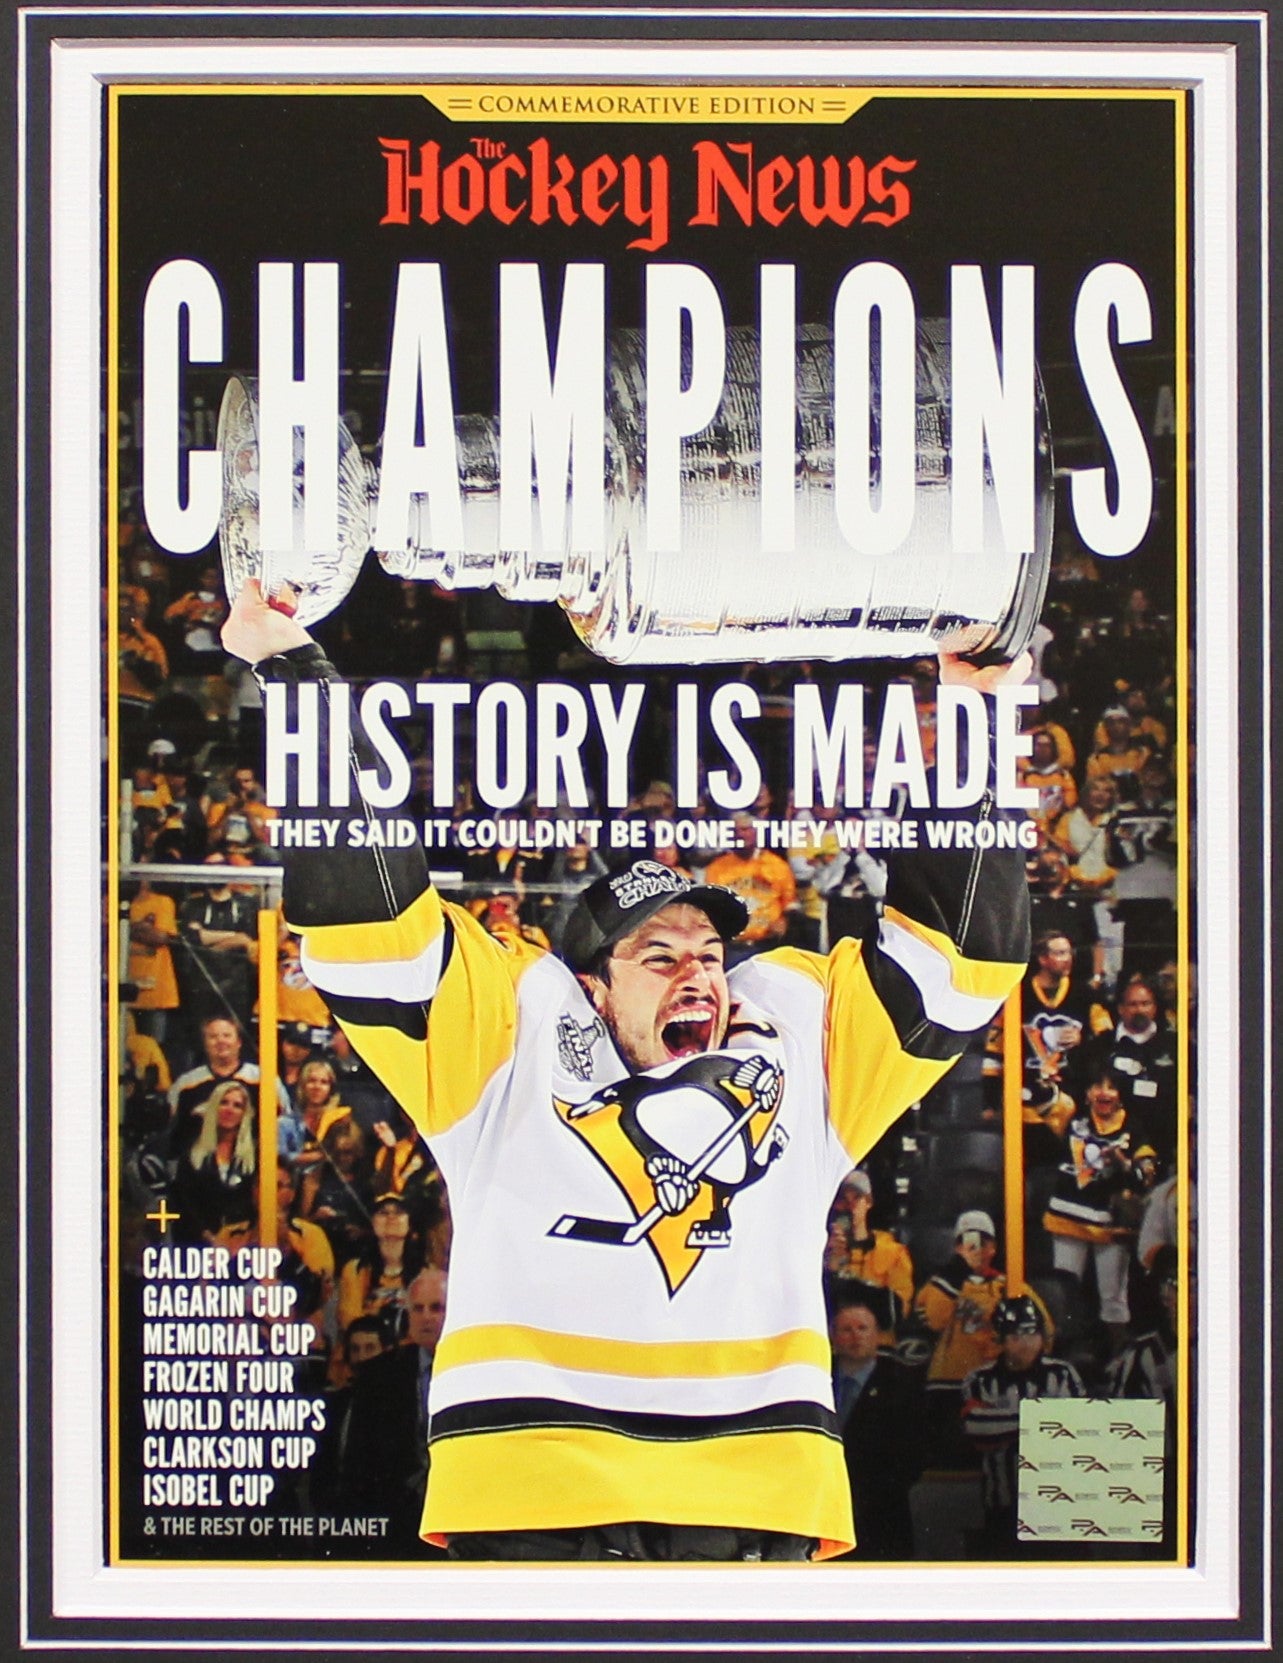 Pittsburgh Penguins 5 Time Stanley Cup Champions - 8x8 Die Cut